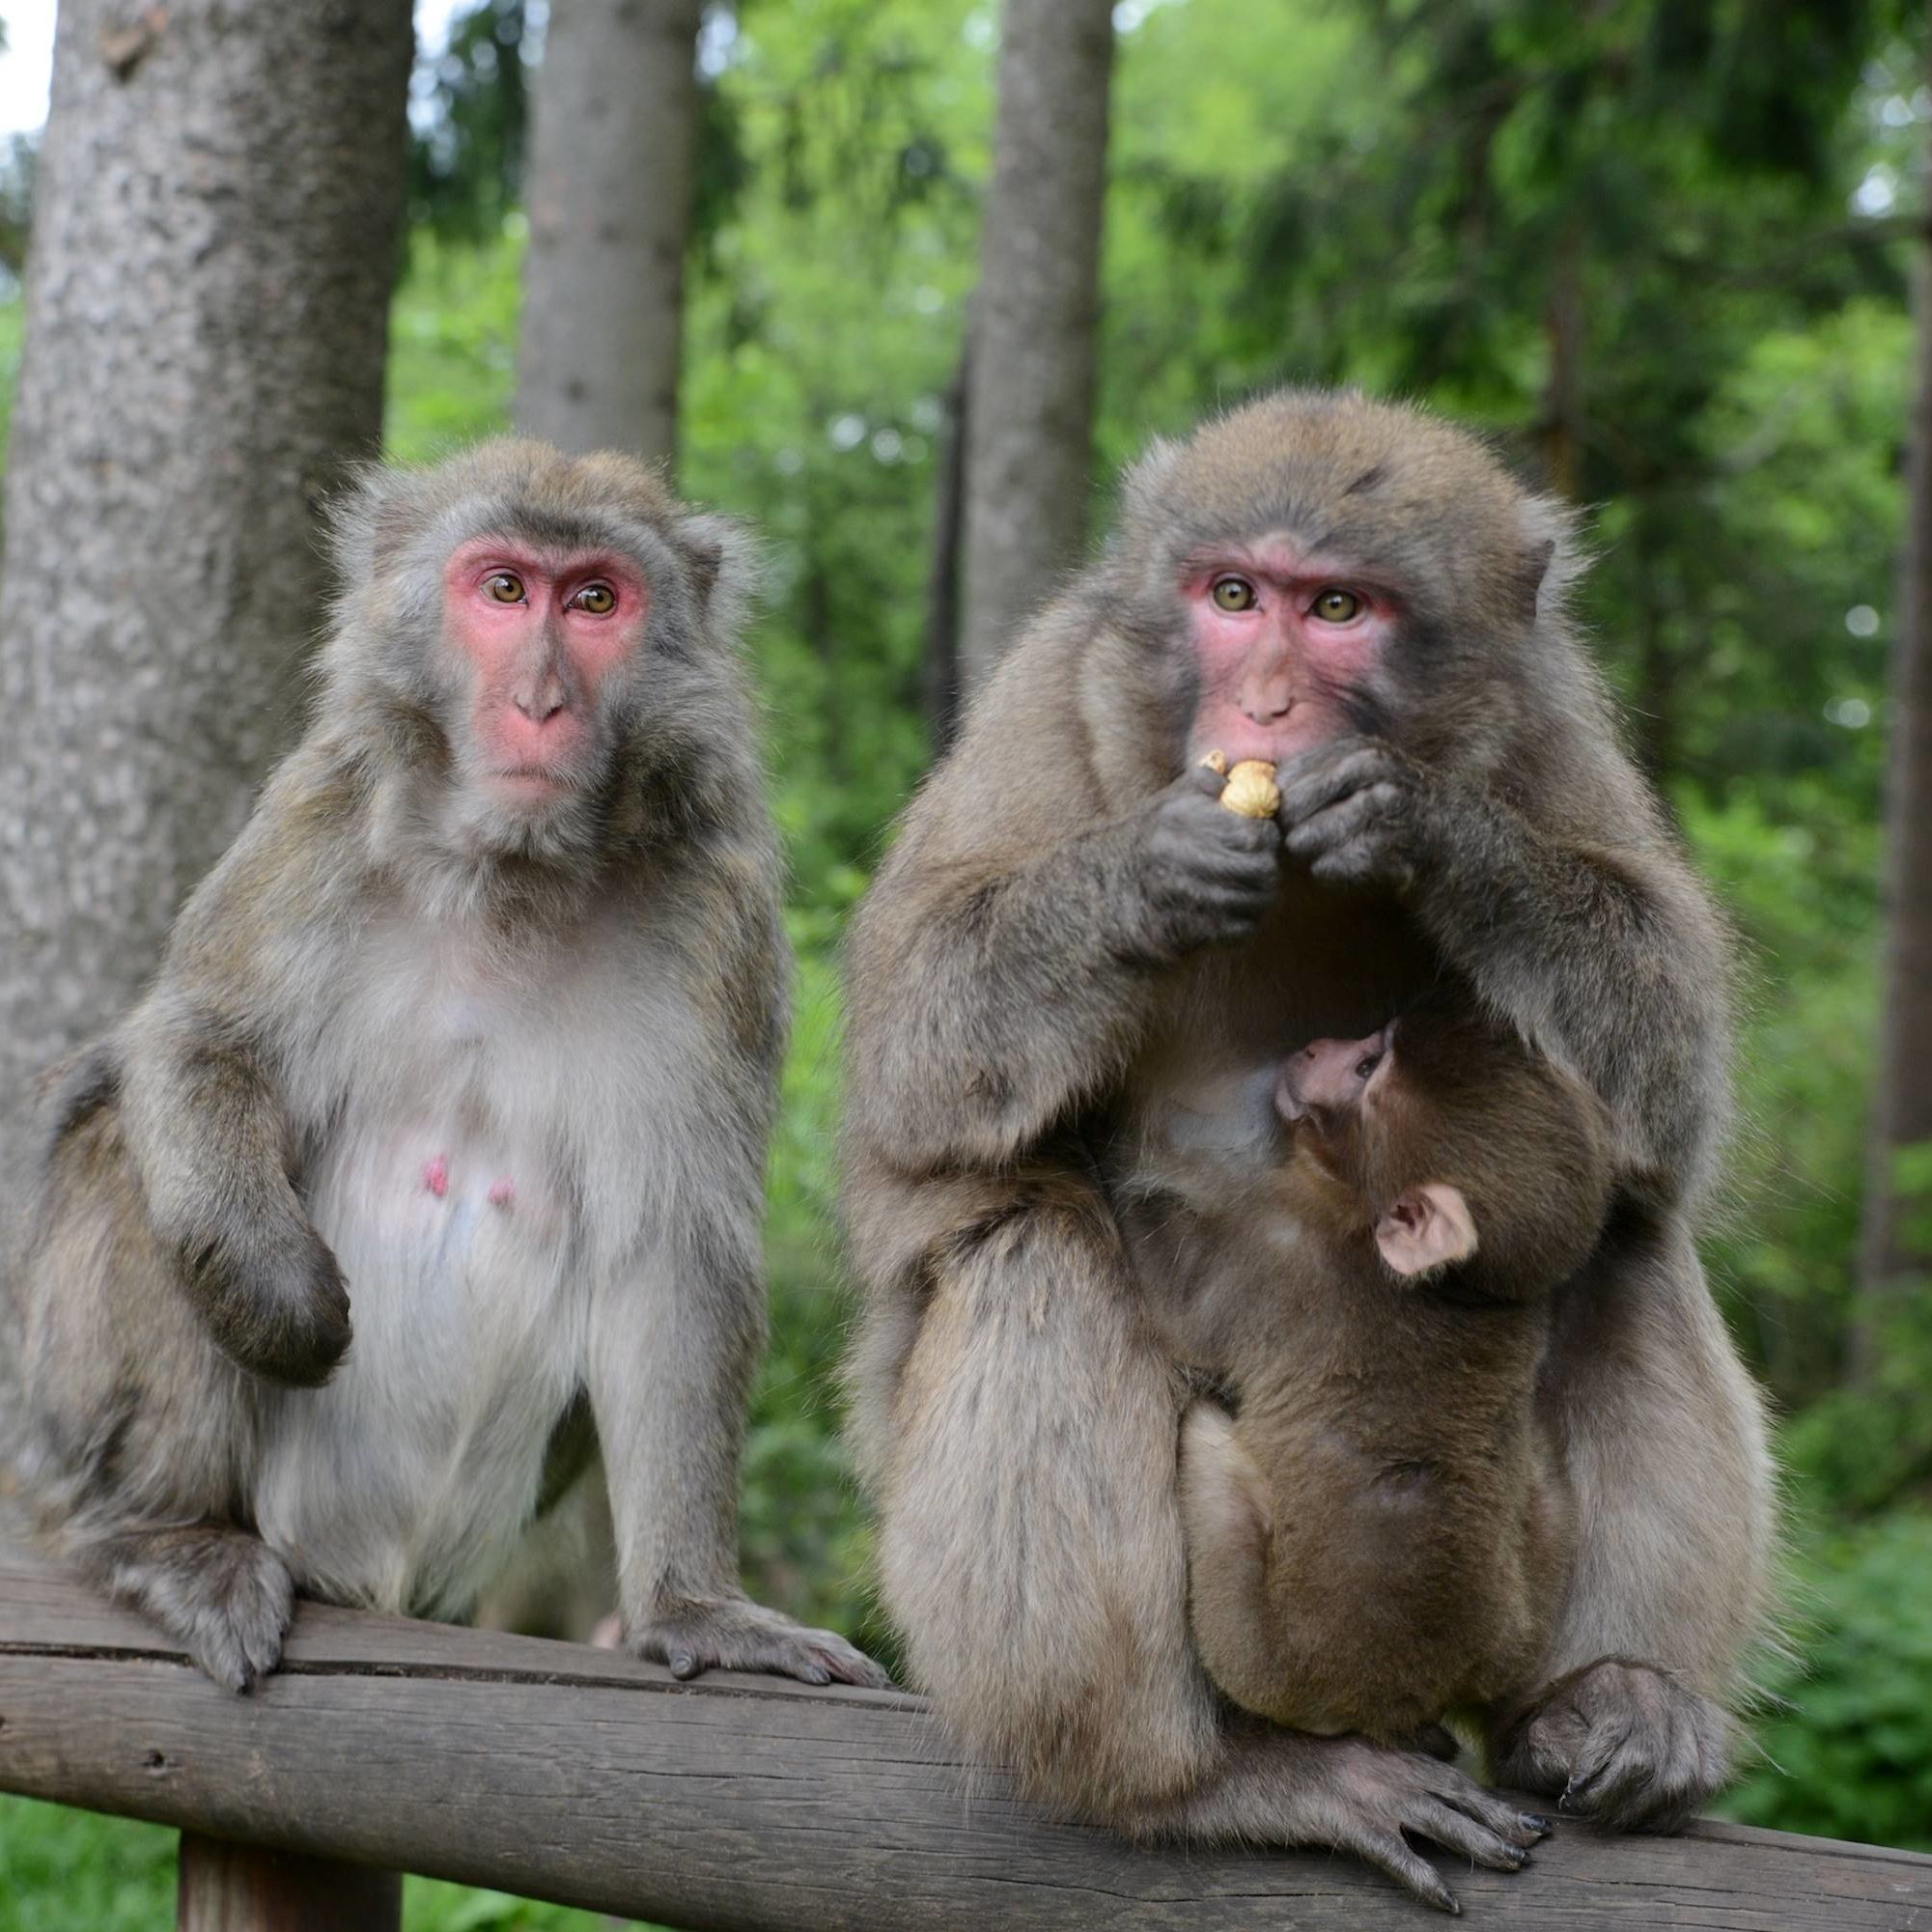 Japanese macaques of the Monkey Mountain at castle ruin Landskron